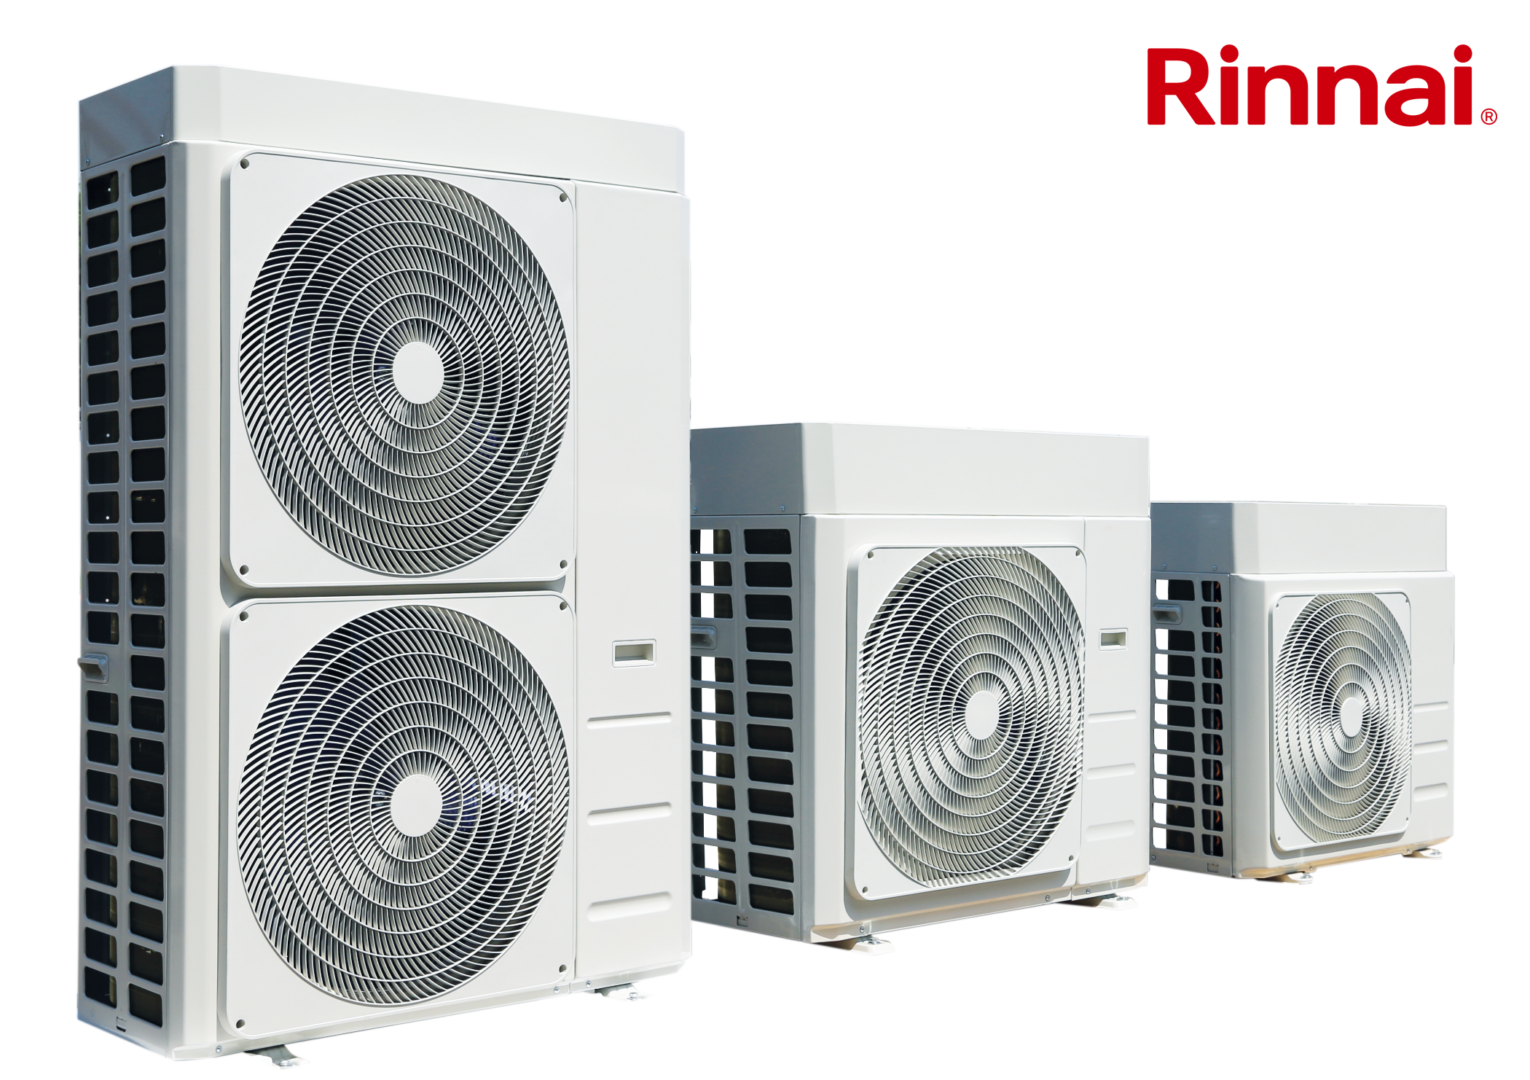 LOGICAL THINKING MAKES RINNAI’s H1 – Hydrogen / BioLPG ready, H2 – Hybrid Solar Thermal and heat pump, H3 LOW-GWP heat pumps – THE informed CHOICE @rinnai_uk